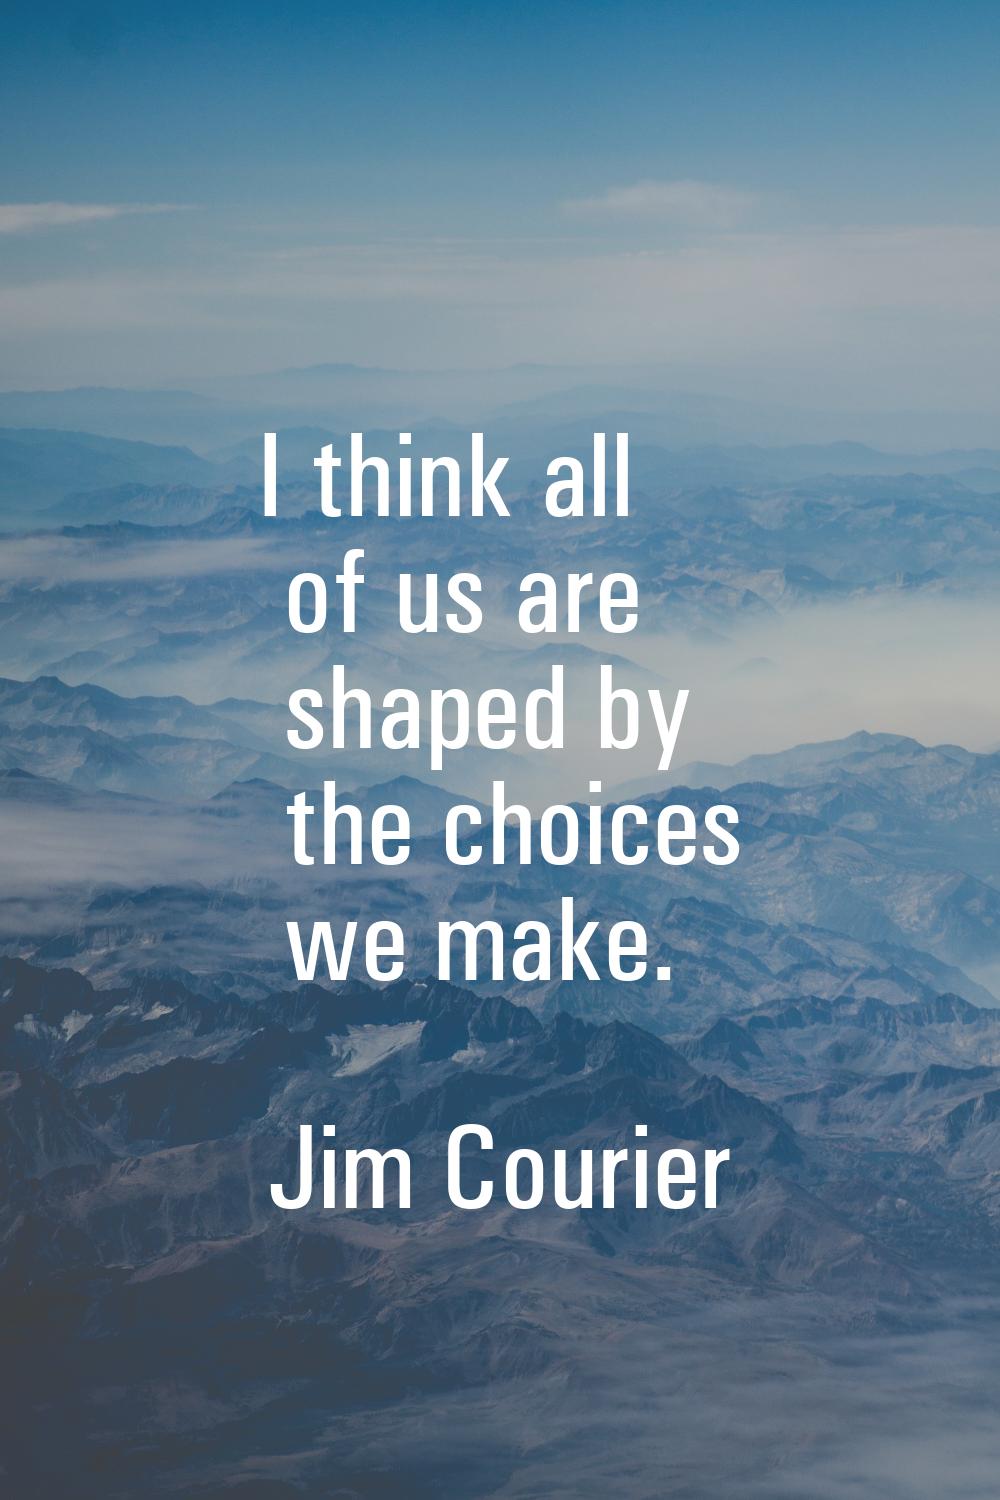 I think all of us are shaped by the choices we make.